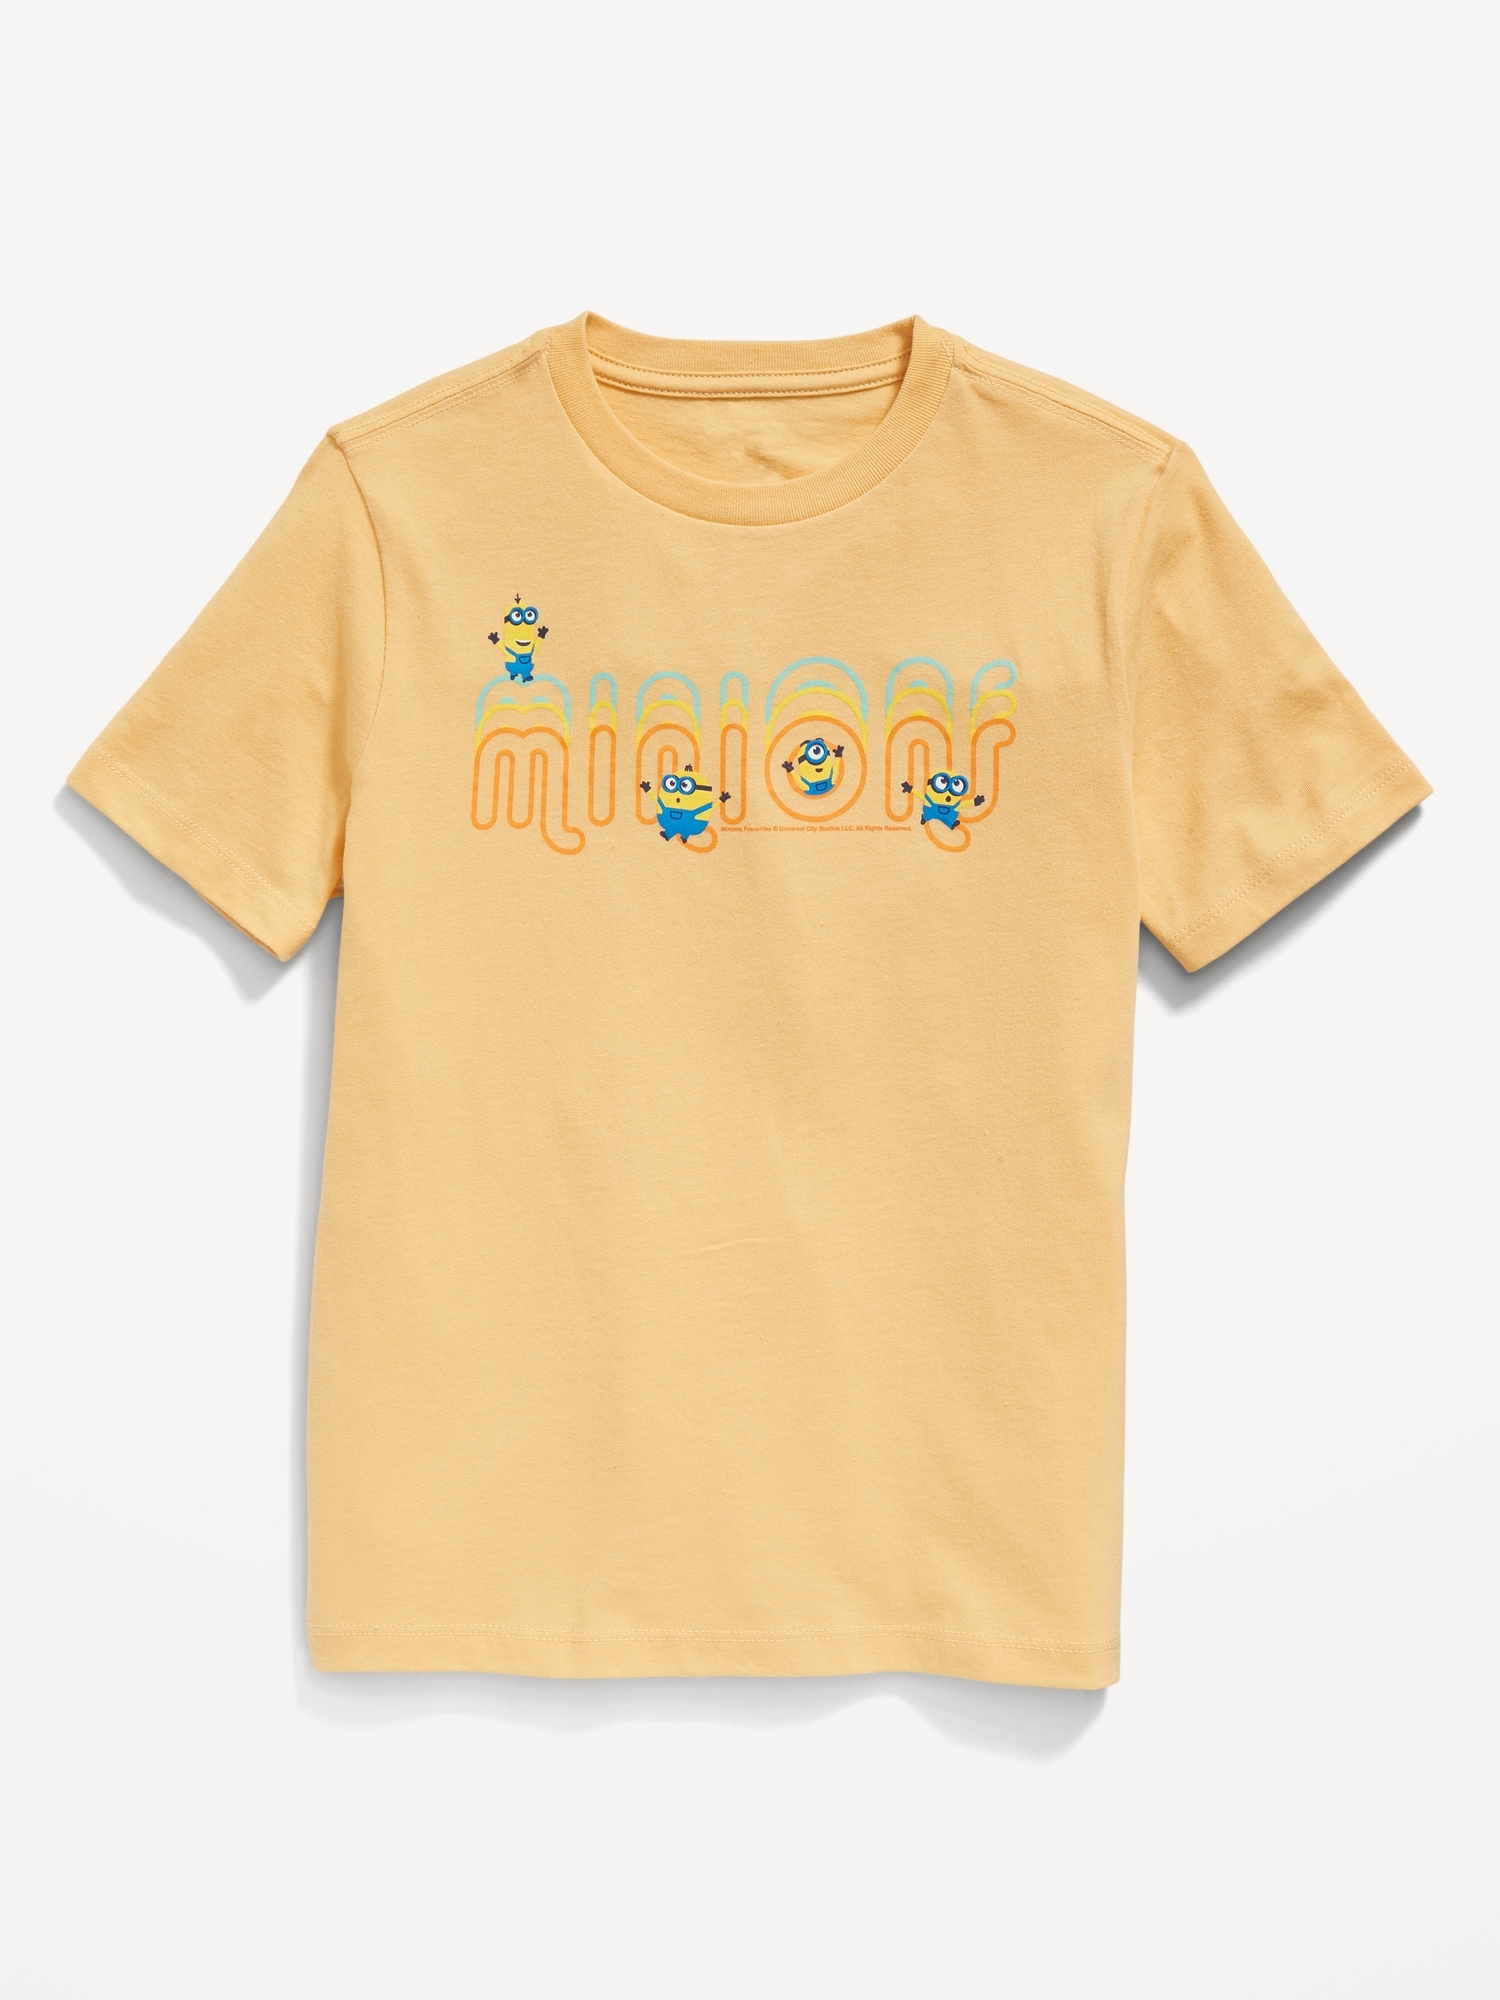 Minions™ Gender-Neutral Graphic T-Shirt for Kids | Old Navy